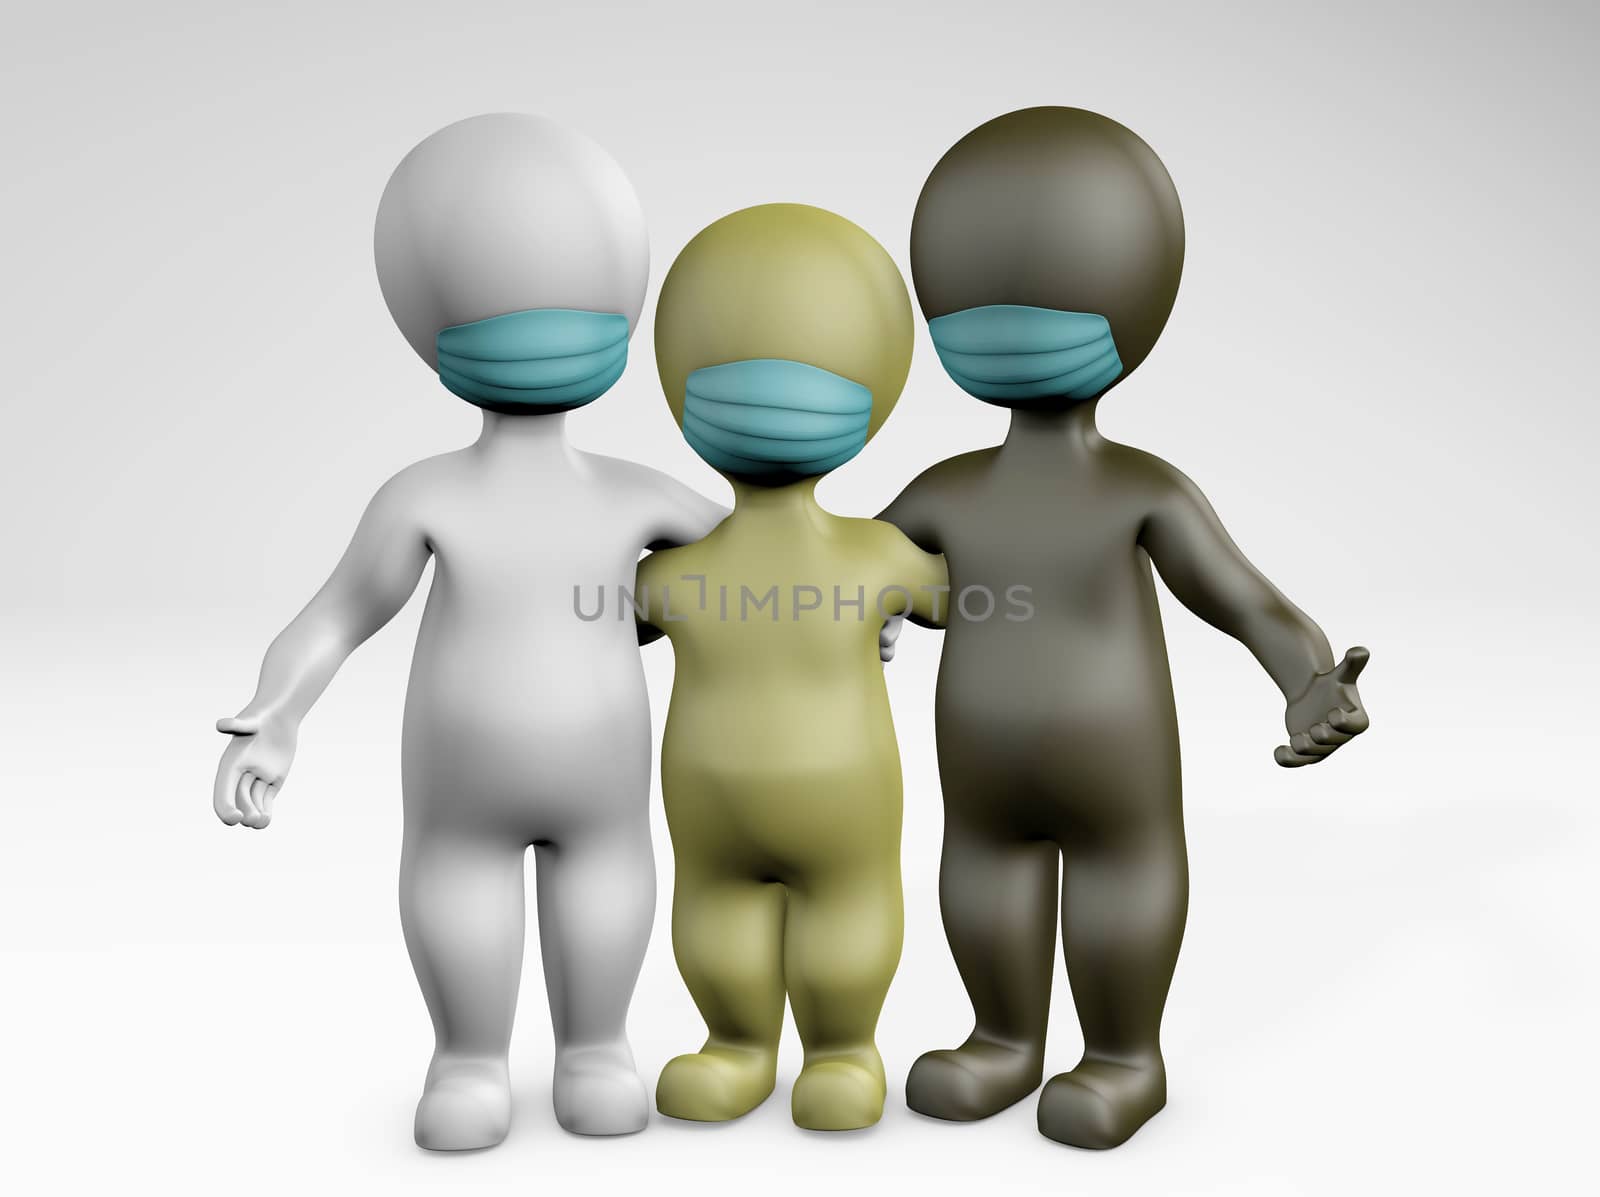 fatty men with mask diversity concept 3d rendering by F1b0nacci